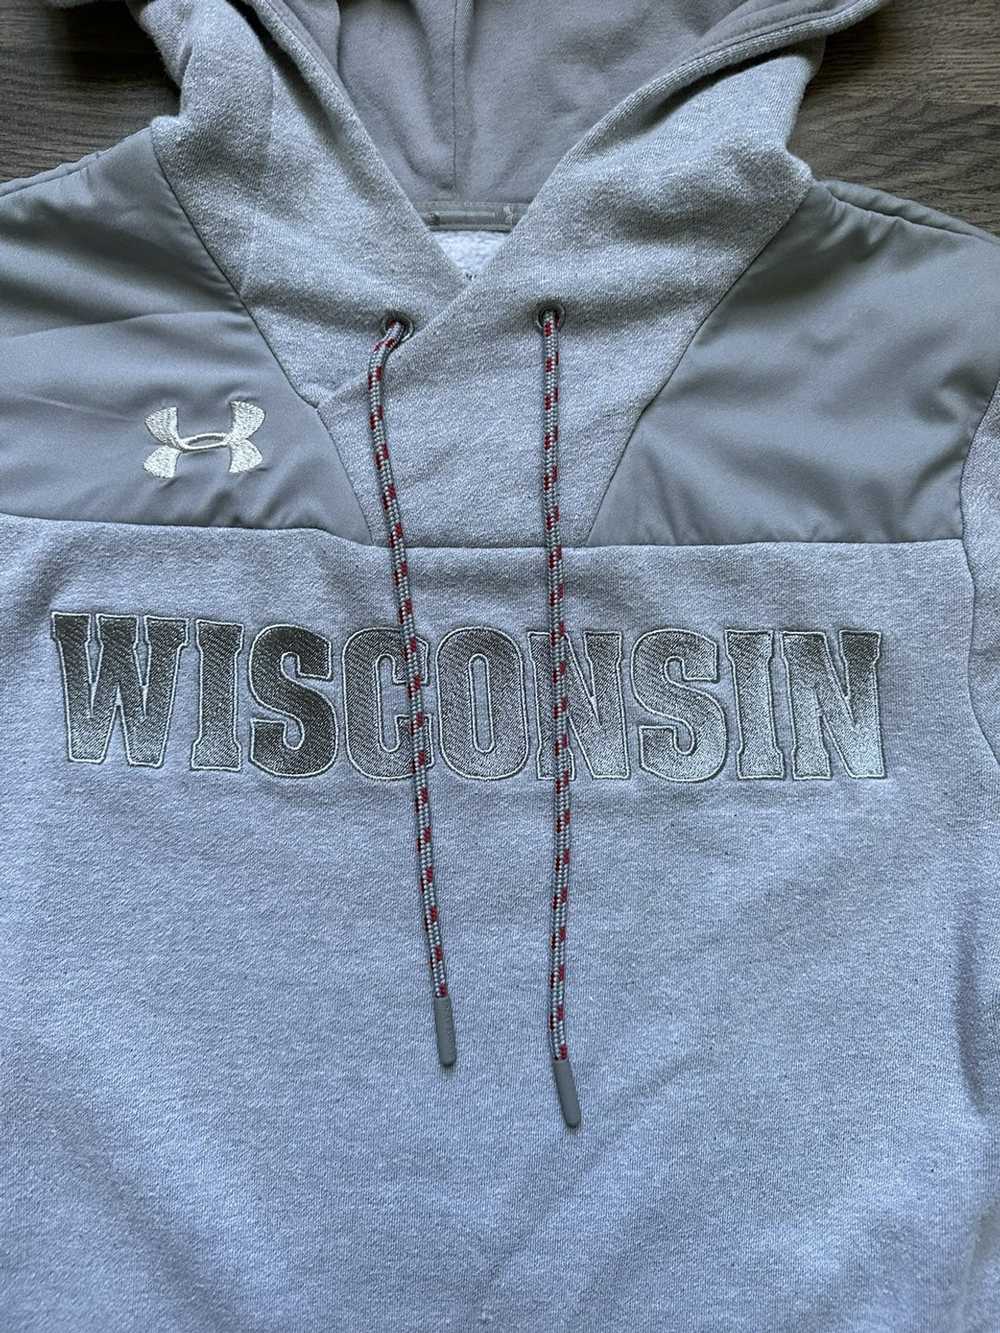 Under Armour Under Armour Wisconsin reflctive hoo… - image 5